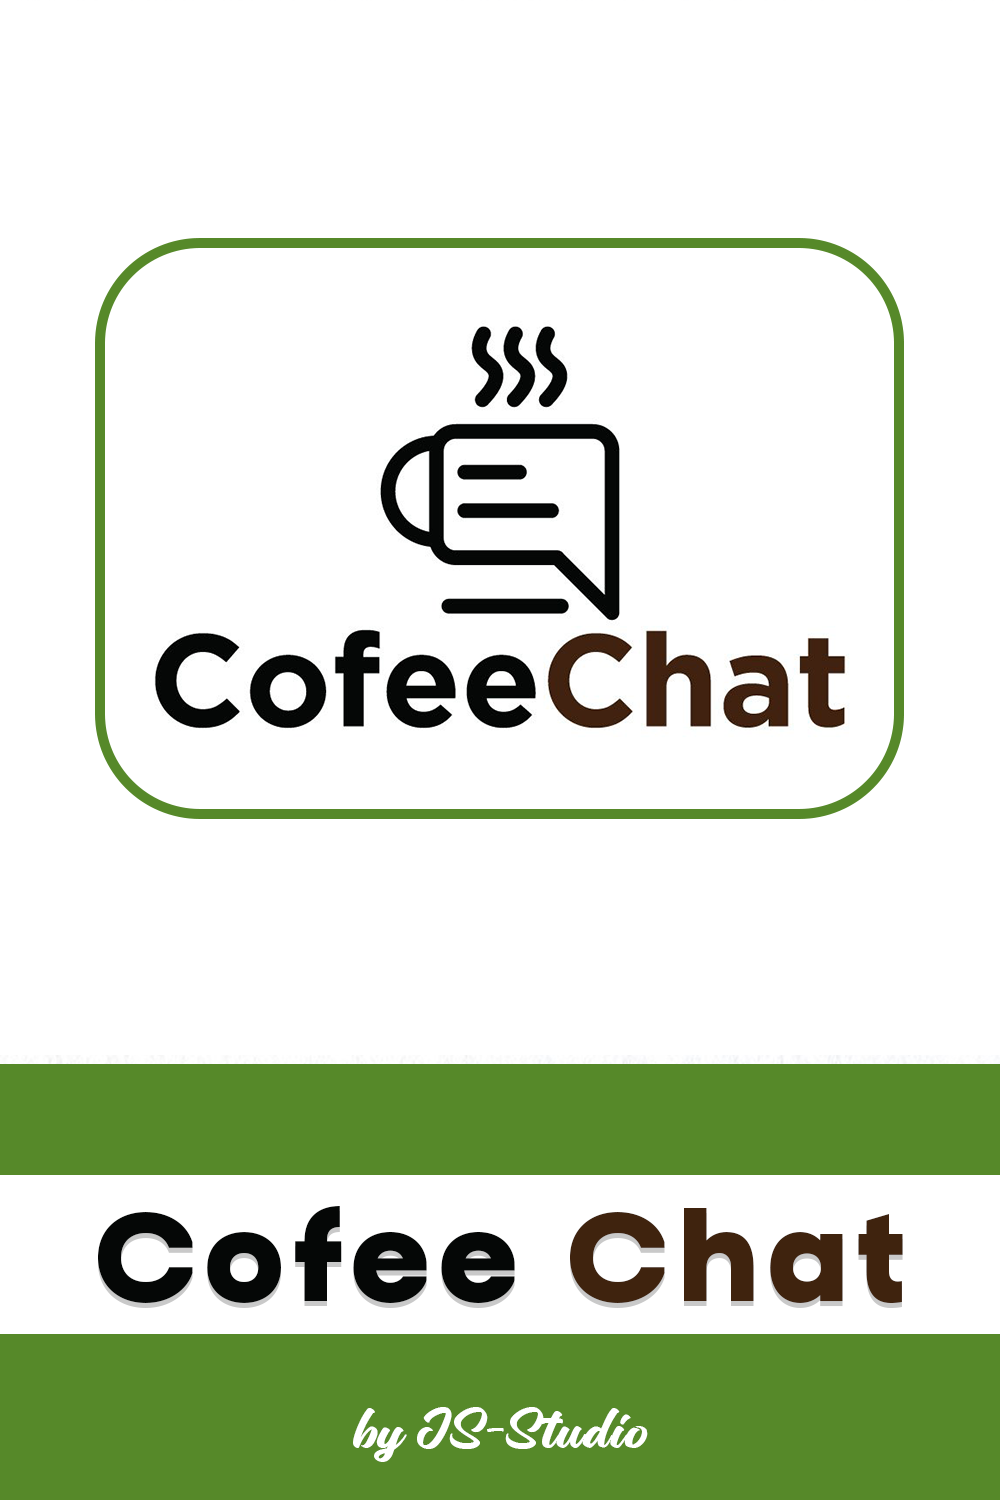 cofee chat pinterest